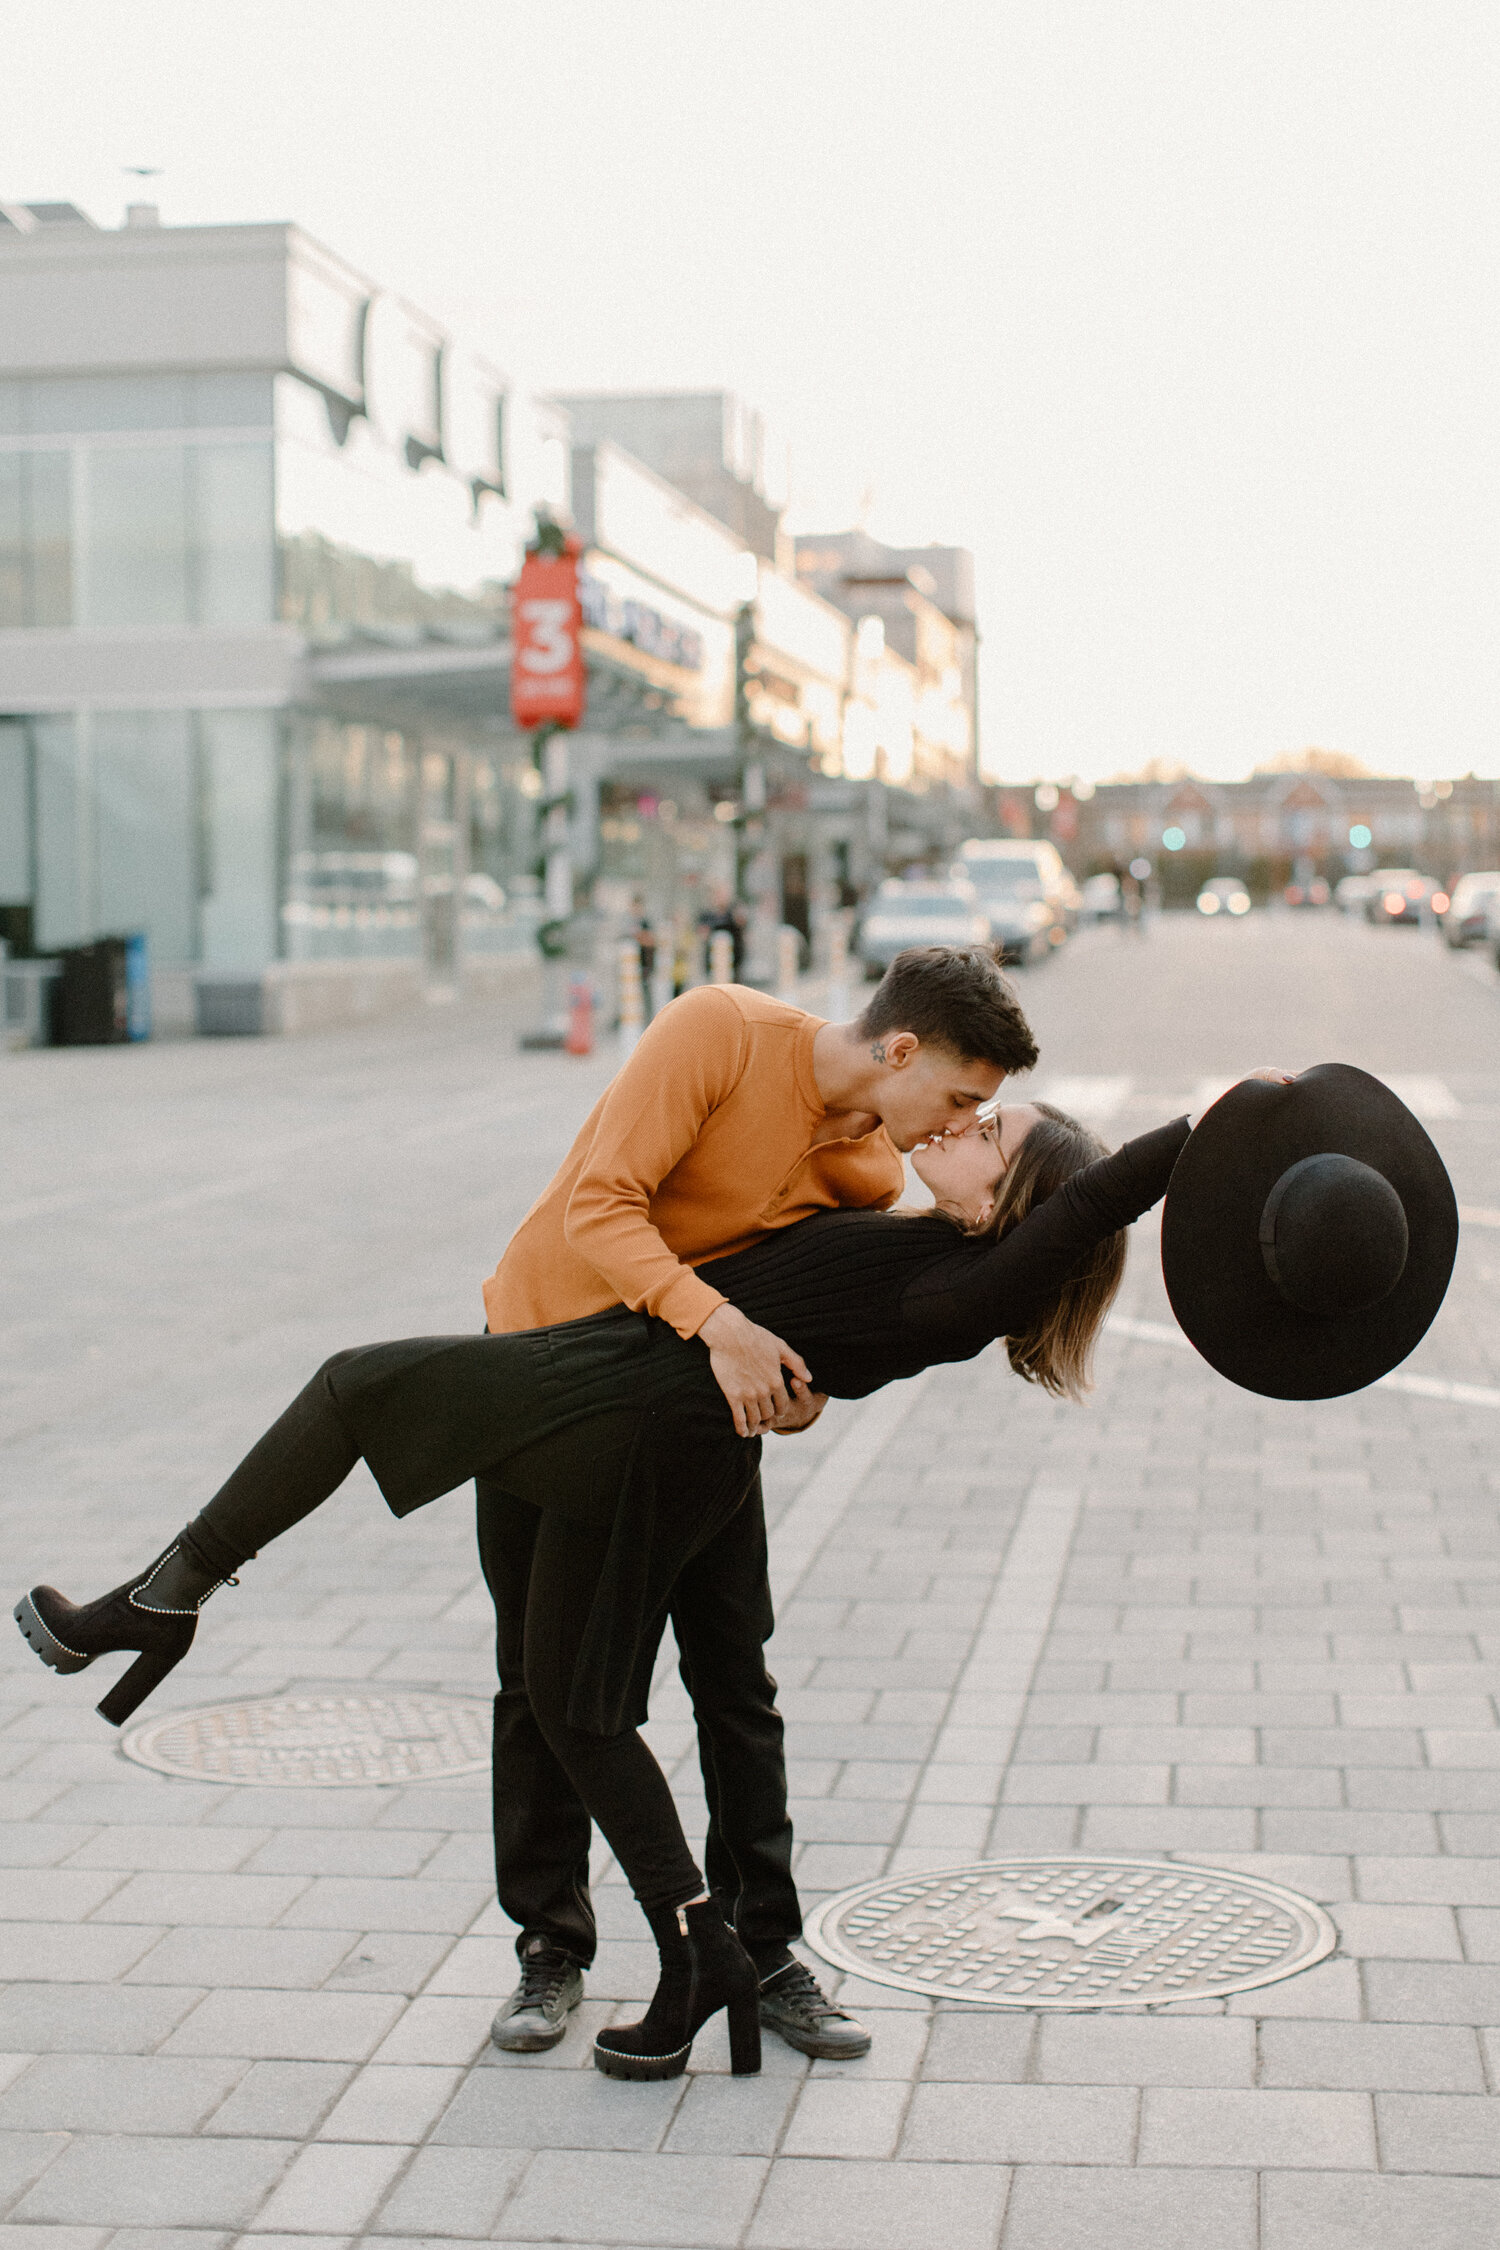  With an urban setting in the backdrop and cars wizzing by, Ontario, Canada couples photographer, Chelsea Mason Photography captures this soon-to-be groom dipping his fiance for a kiss. dipping and kissing, woman raising brimmed hat in air while kiss